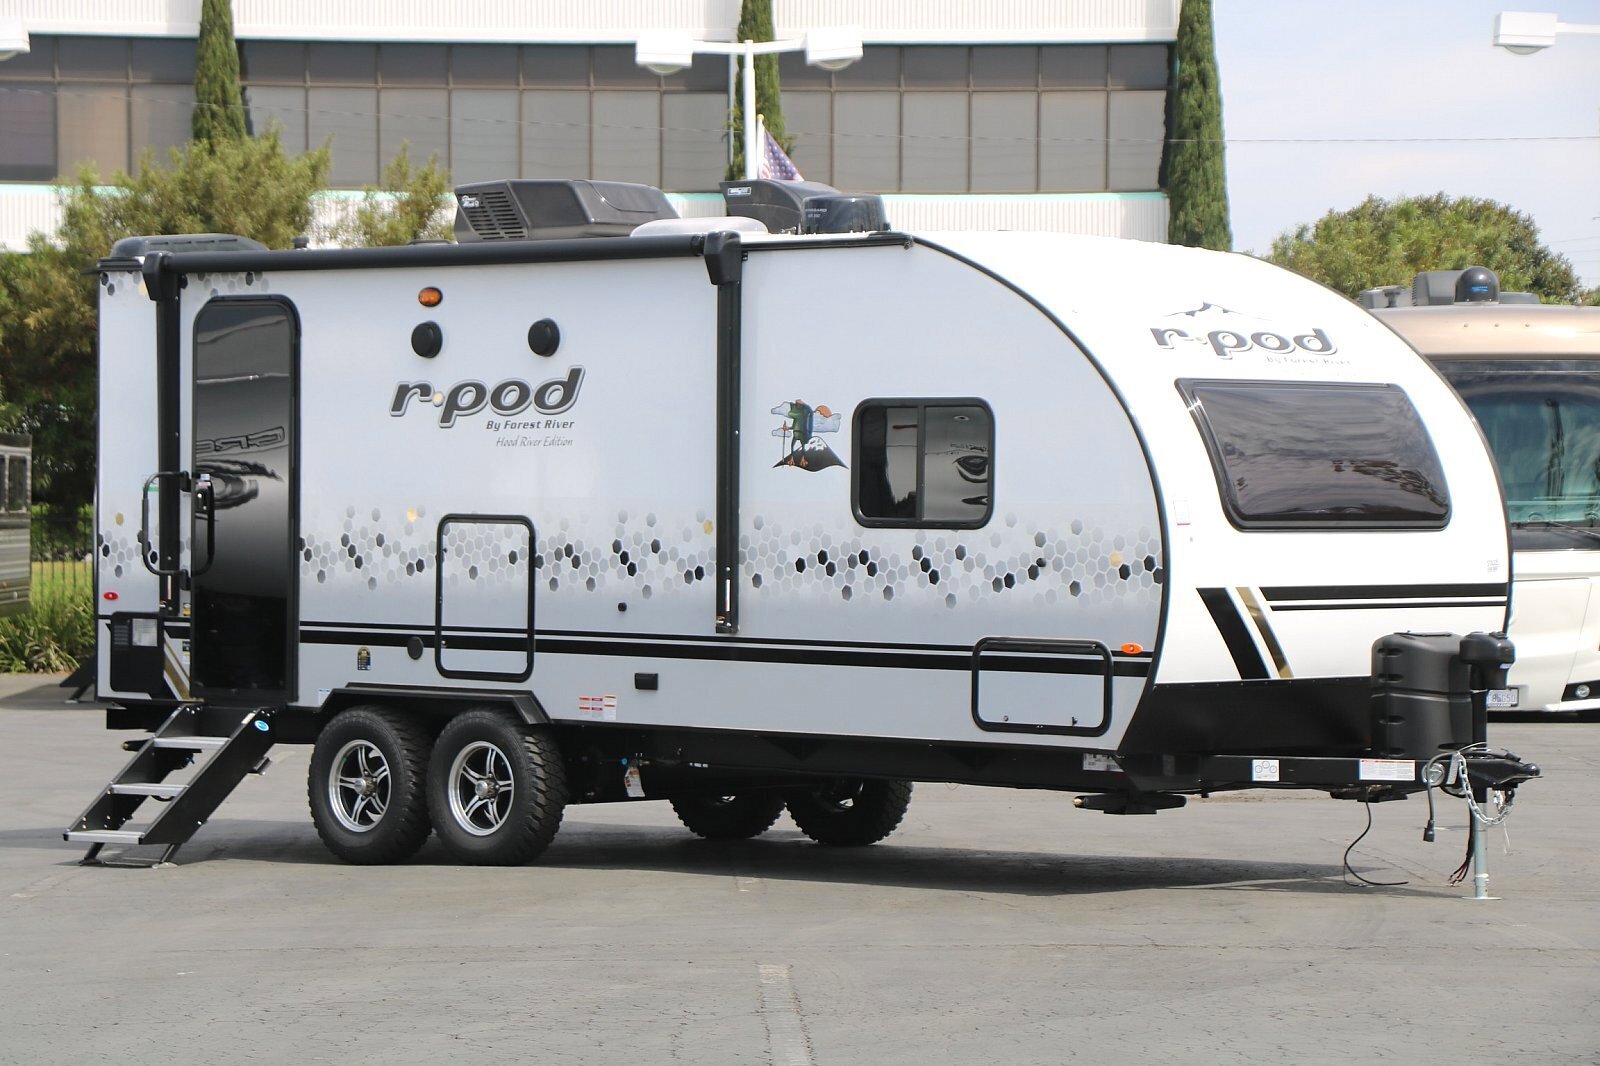 2022 FOREST RIVER R-POD RP202